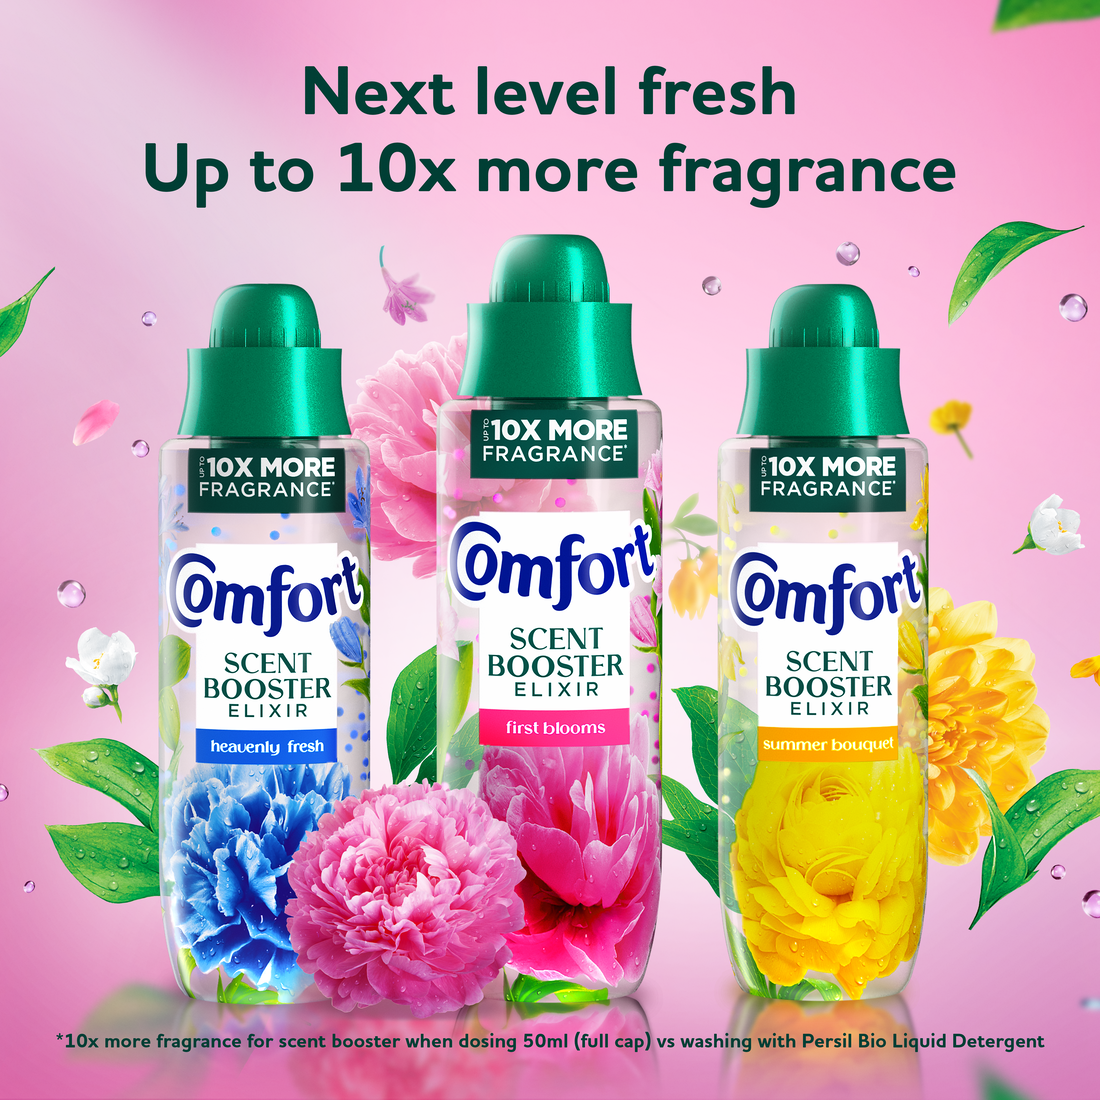 Next level fresh
Up to 10 times more fragrance

*10 times more fragrance for scent booster when dosing 50ml (full cap) vs washing with Persil Bio Liquid Detergent